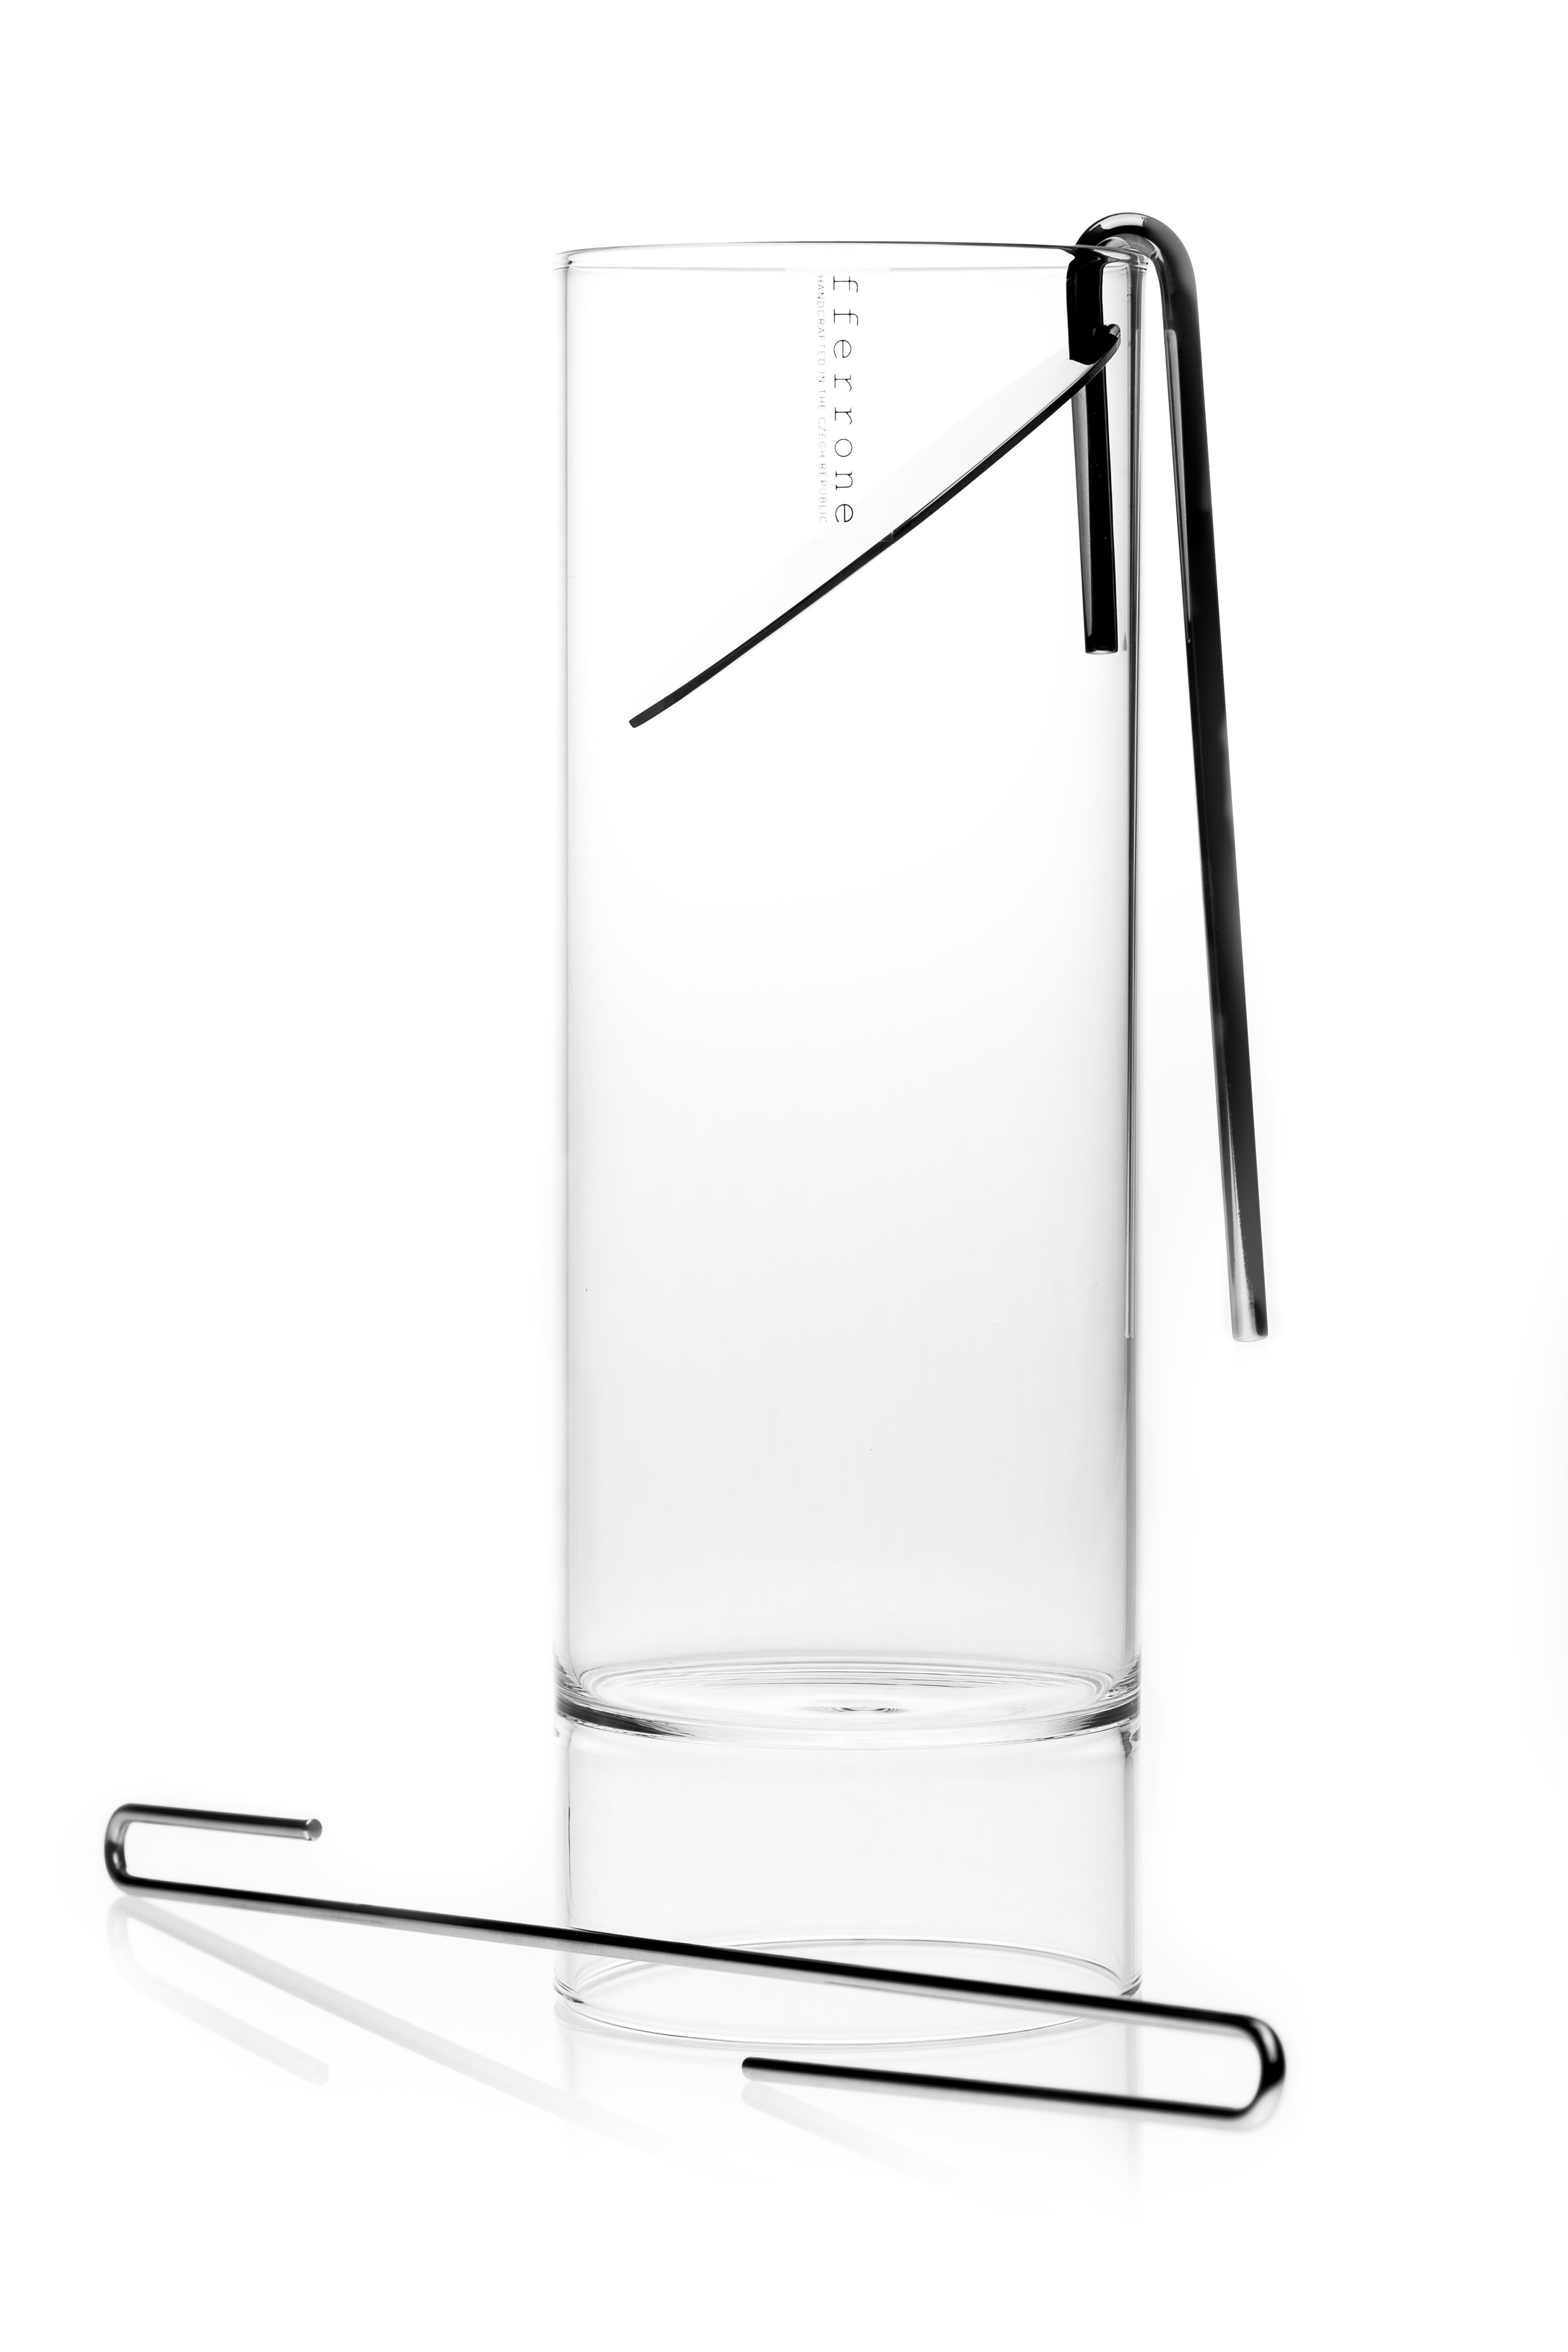 The contemporary Czech glass minimal Revolution collection set includes a cocktail mixer carafe, strainer, stir stick, and six double-ended Liqueur glasses.

Strikingly simple in form, the minimal Revolution collection is handcrafted in the Czech